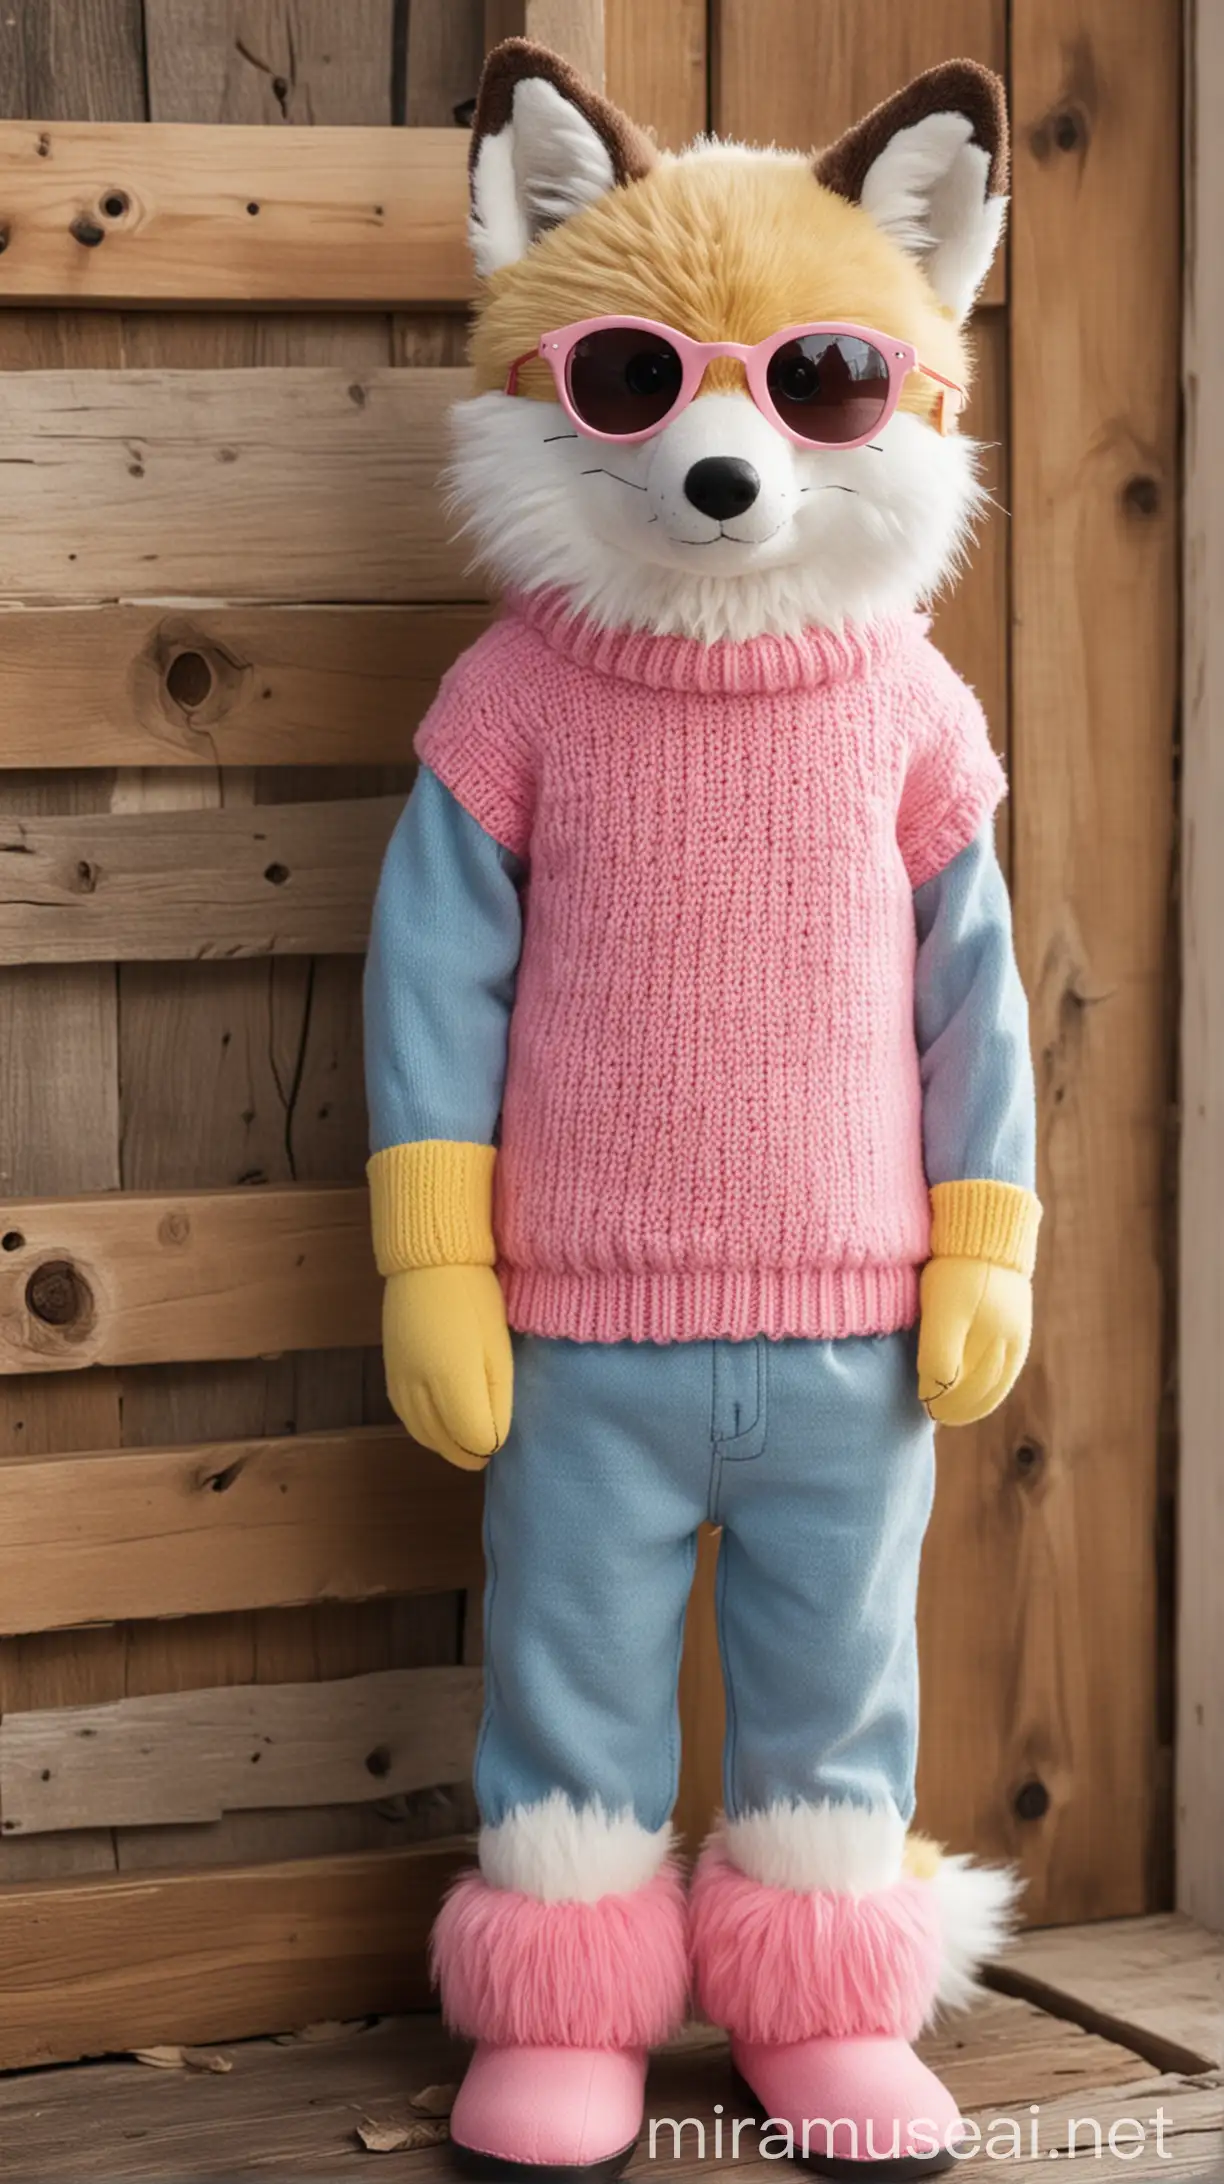 Blue Fox Plush Toy Wearing Pink Sunglasses and Yellow Sweater in Rustic House